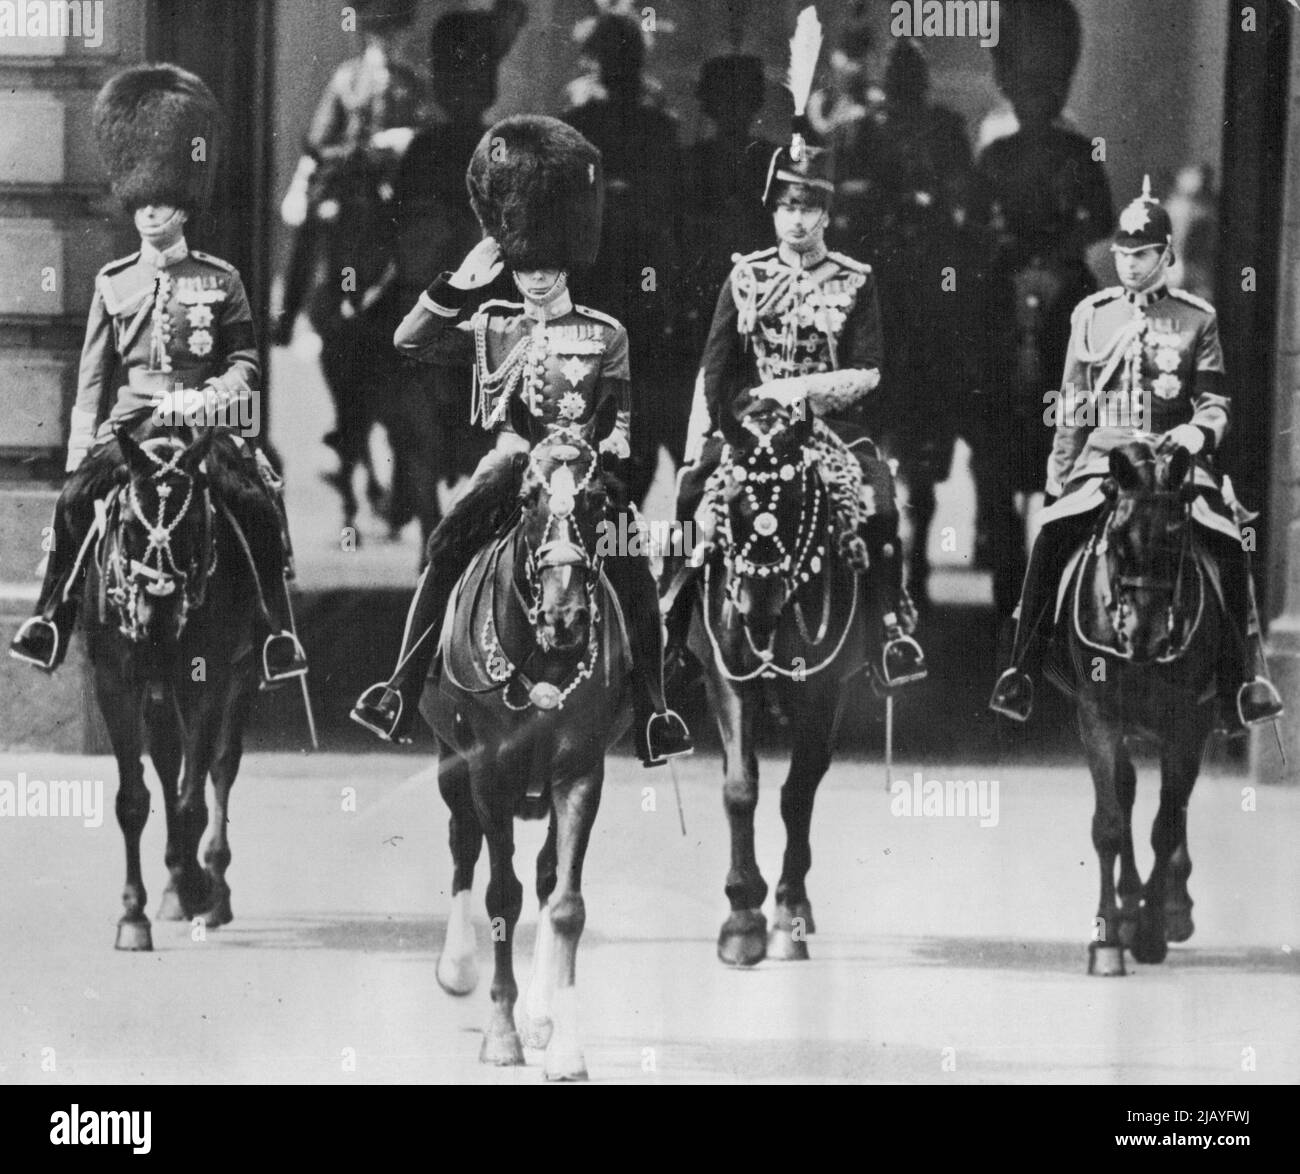 King Edward's First Trooping of the Colour Since His Accession: King Edward with his brothers, the Duke of York (left); the Duke of Gloucester and the Duke of Kent (right) riding from Buckingham Palace, London, S.W. today, to the trooping the Colour ceremony on the Horse Guards Parade, Whitehall, London, in celebration of his majesty's 42nd birthday. June 23, 1936. (Photo by The Topical Press Agency Ltd.). Stock Photo